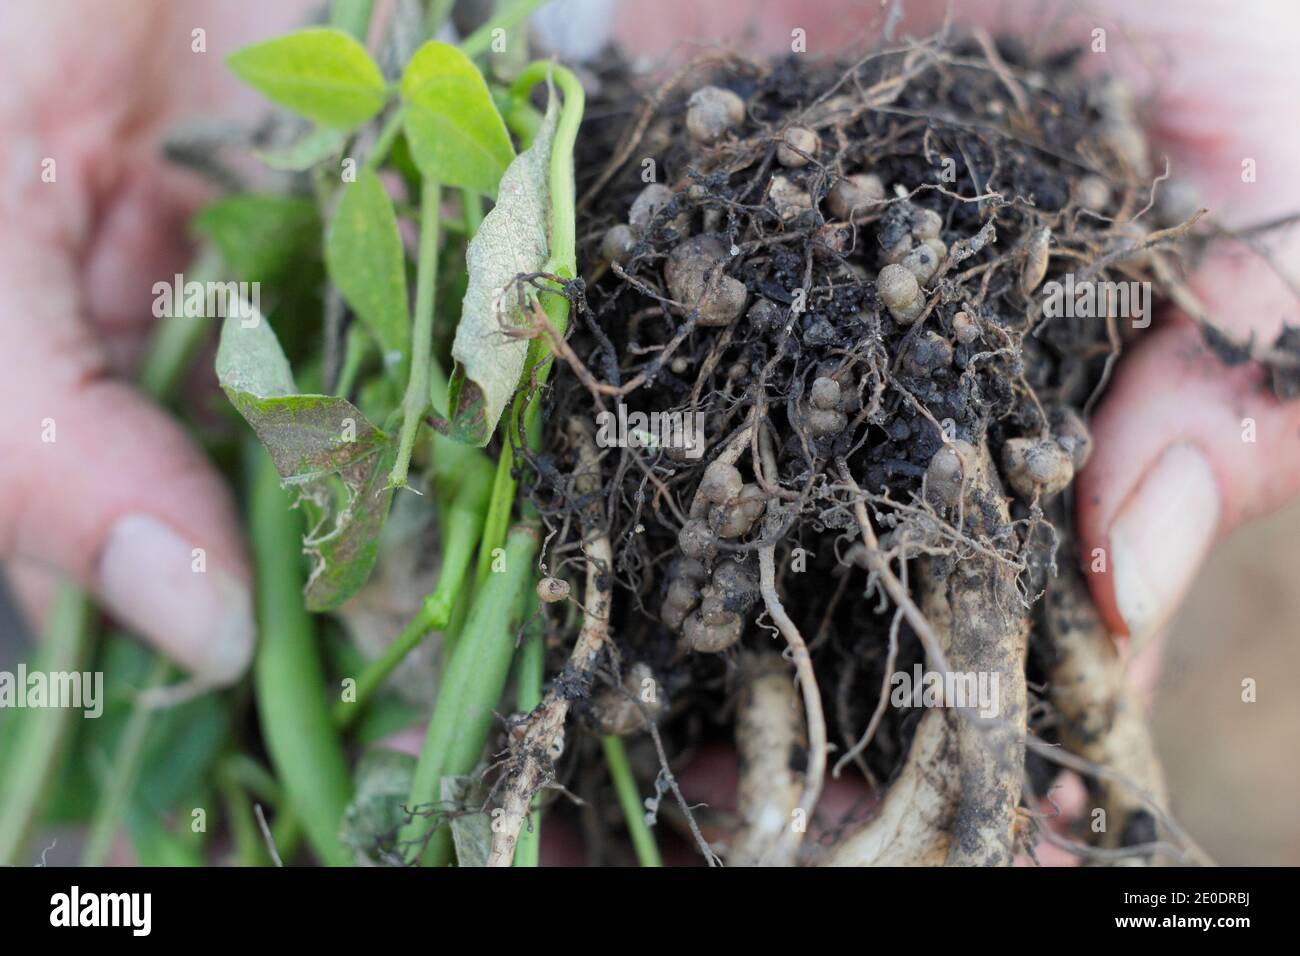 Nitrogen fixation. Nitrogen fixing nodules in the root system of a runner bean plant developed in symbiotic relationship with soil bacteria, rhizobia. Stock Photo